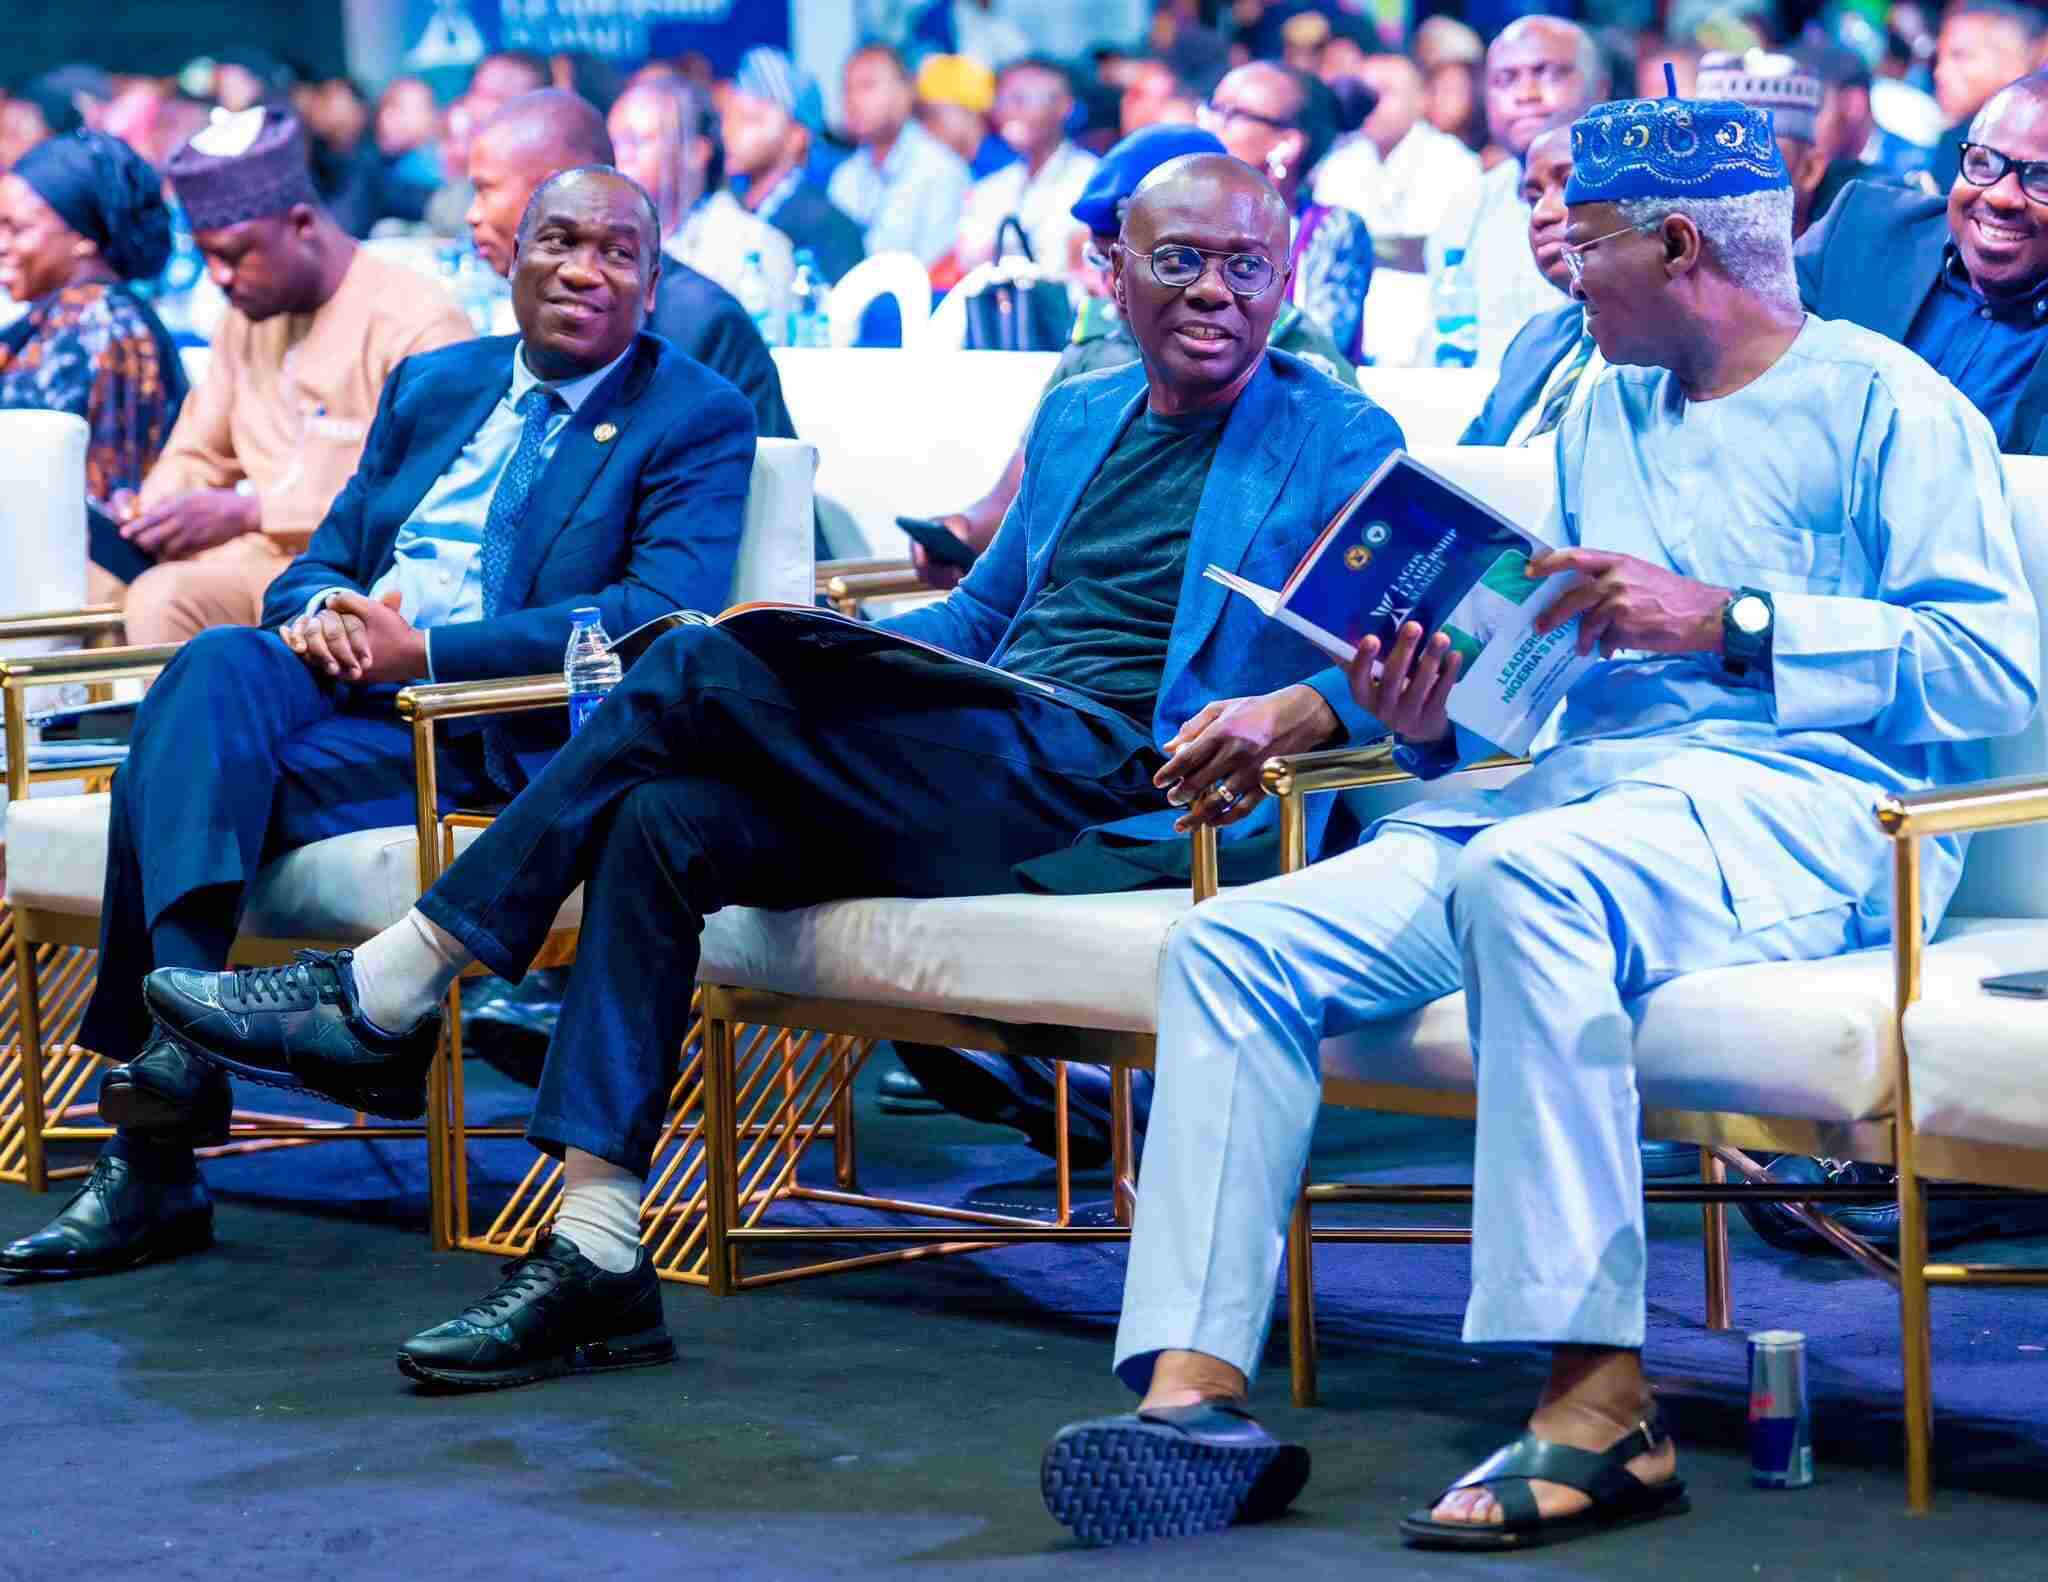 Sanwo-Olu Highlights Importance Of Youth Empowerment